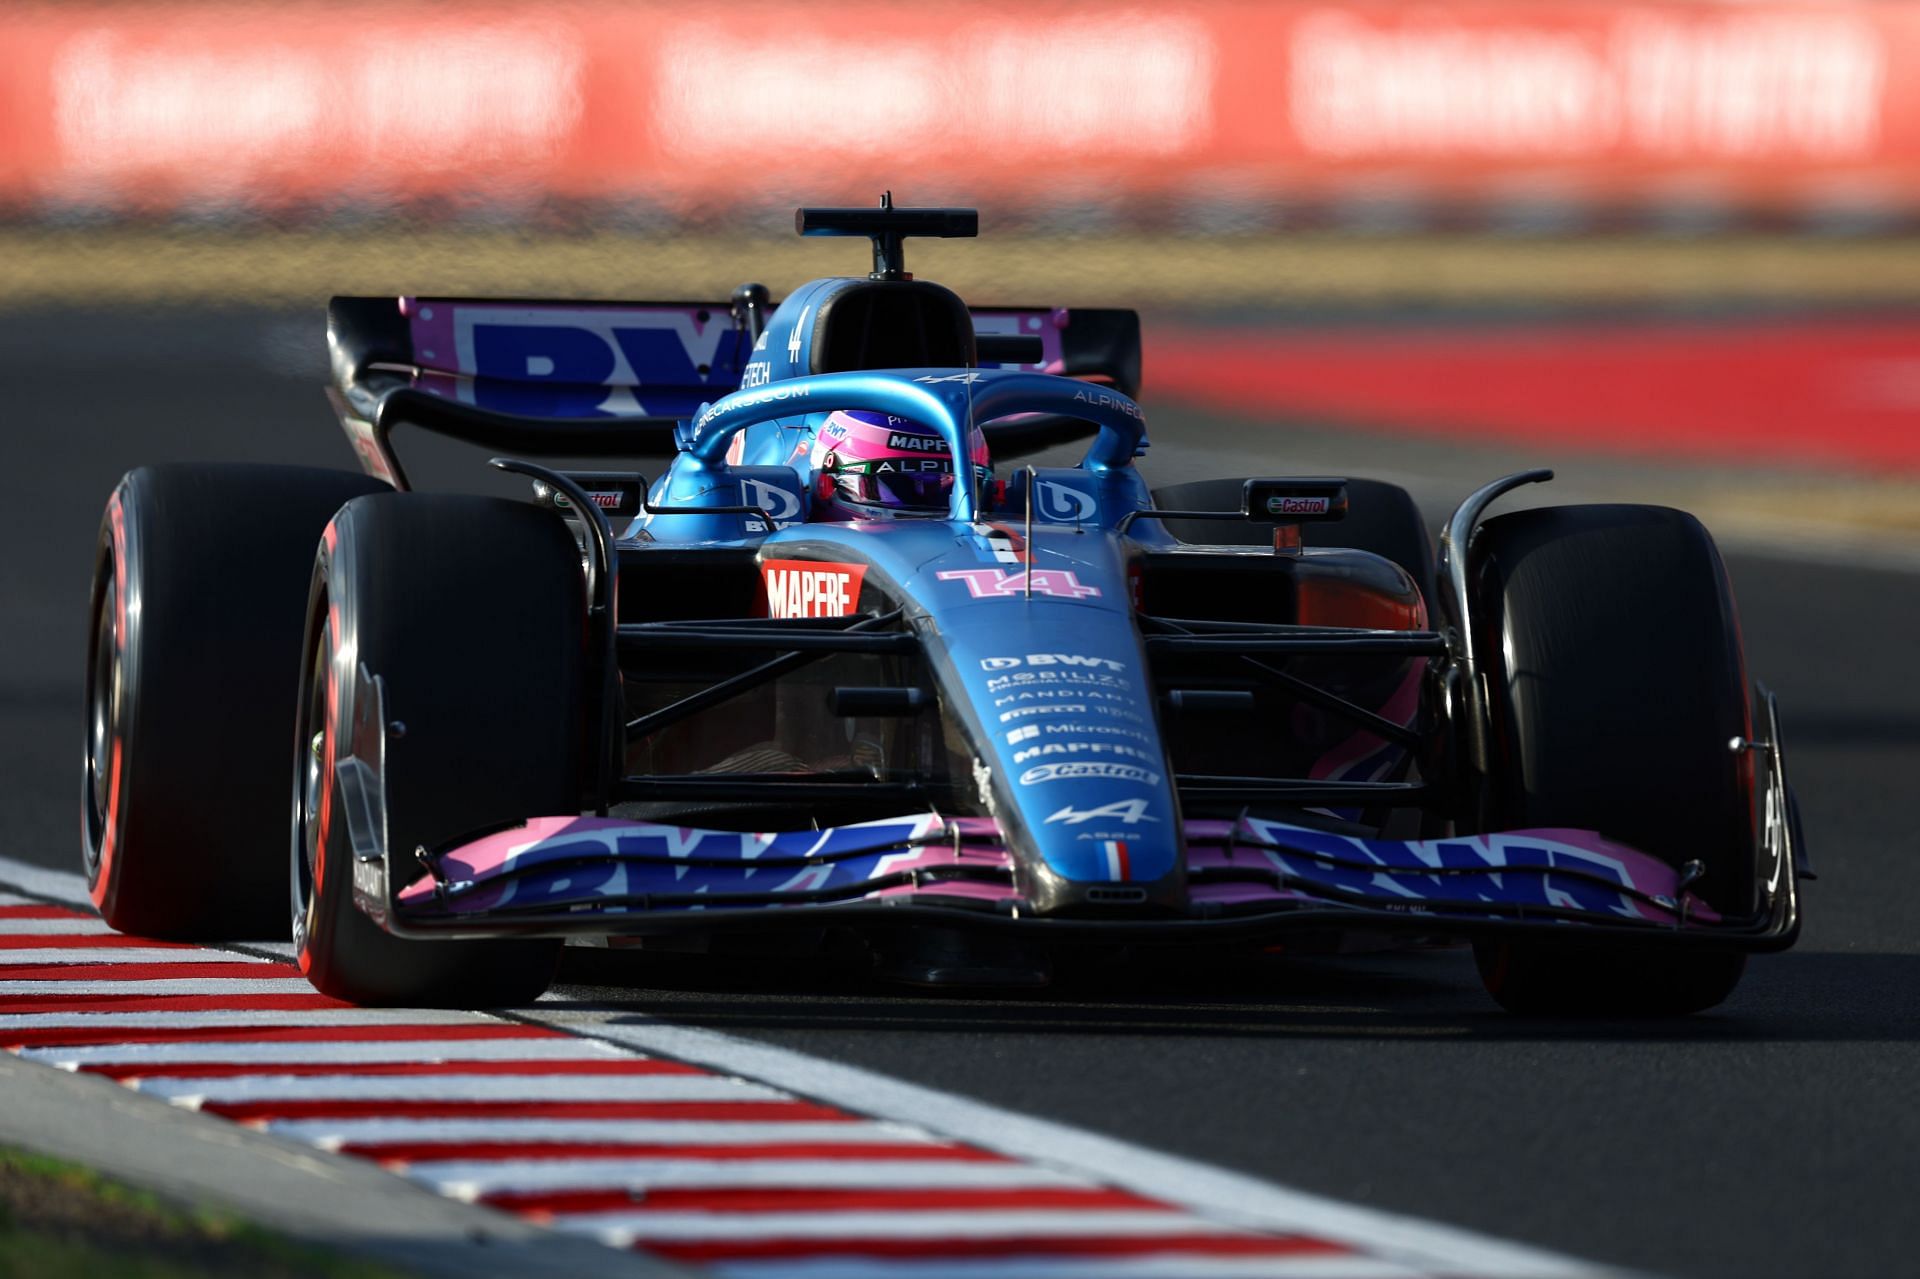 Alpine F1 driver Fernando Alonso in action during Free Practice at the 2022 F1 Hungarian GP weekend (Photo by Francois Nel/Getty Images)